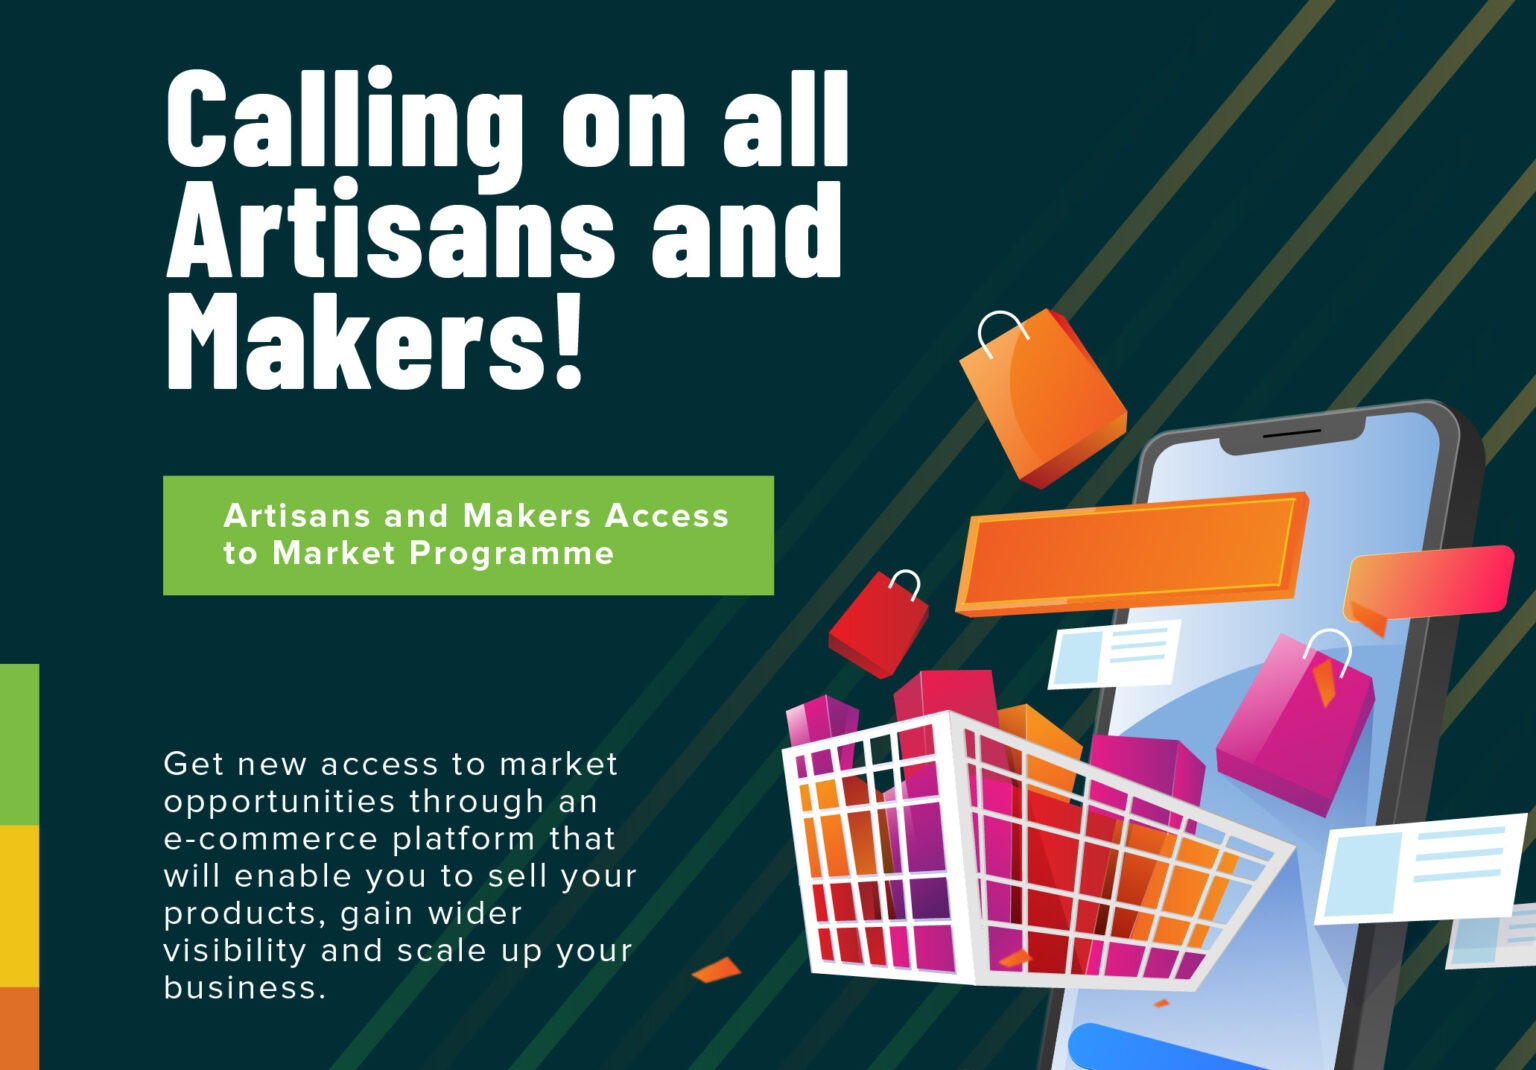 Artisans and Makers Access to Market Programme